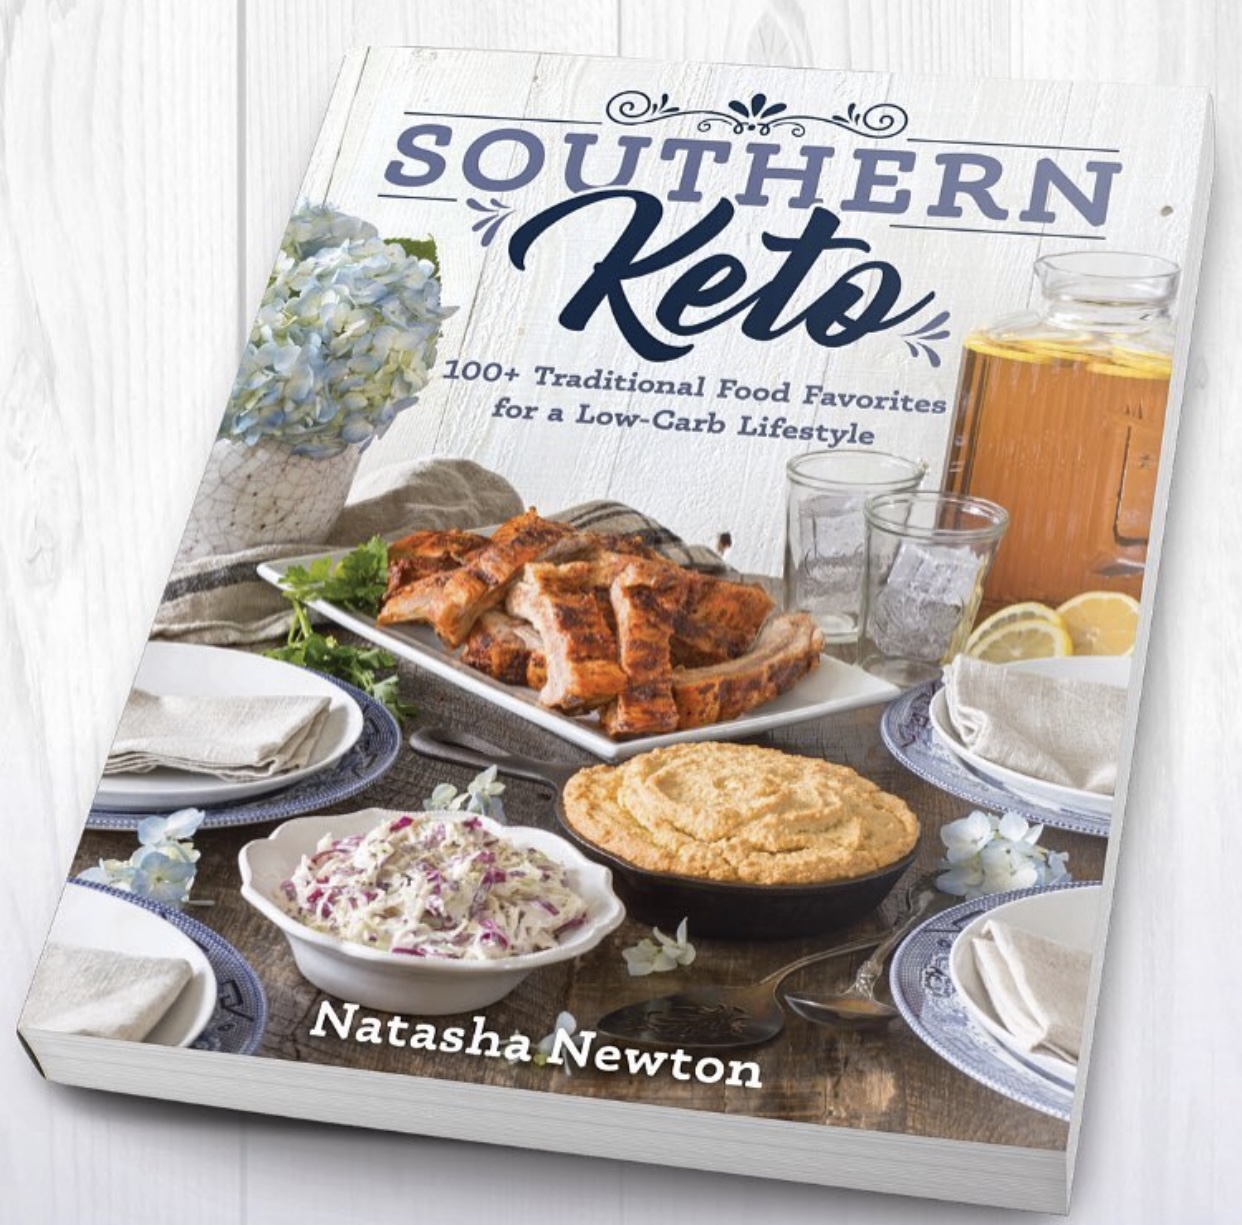 Biscuits to Hushpuppies: 10 Southern Keto Recipes You Need Now